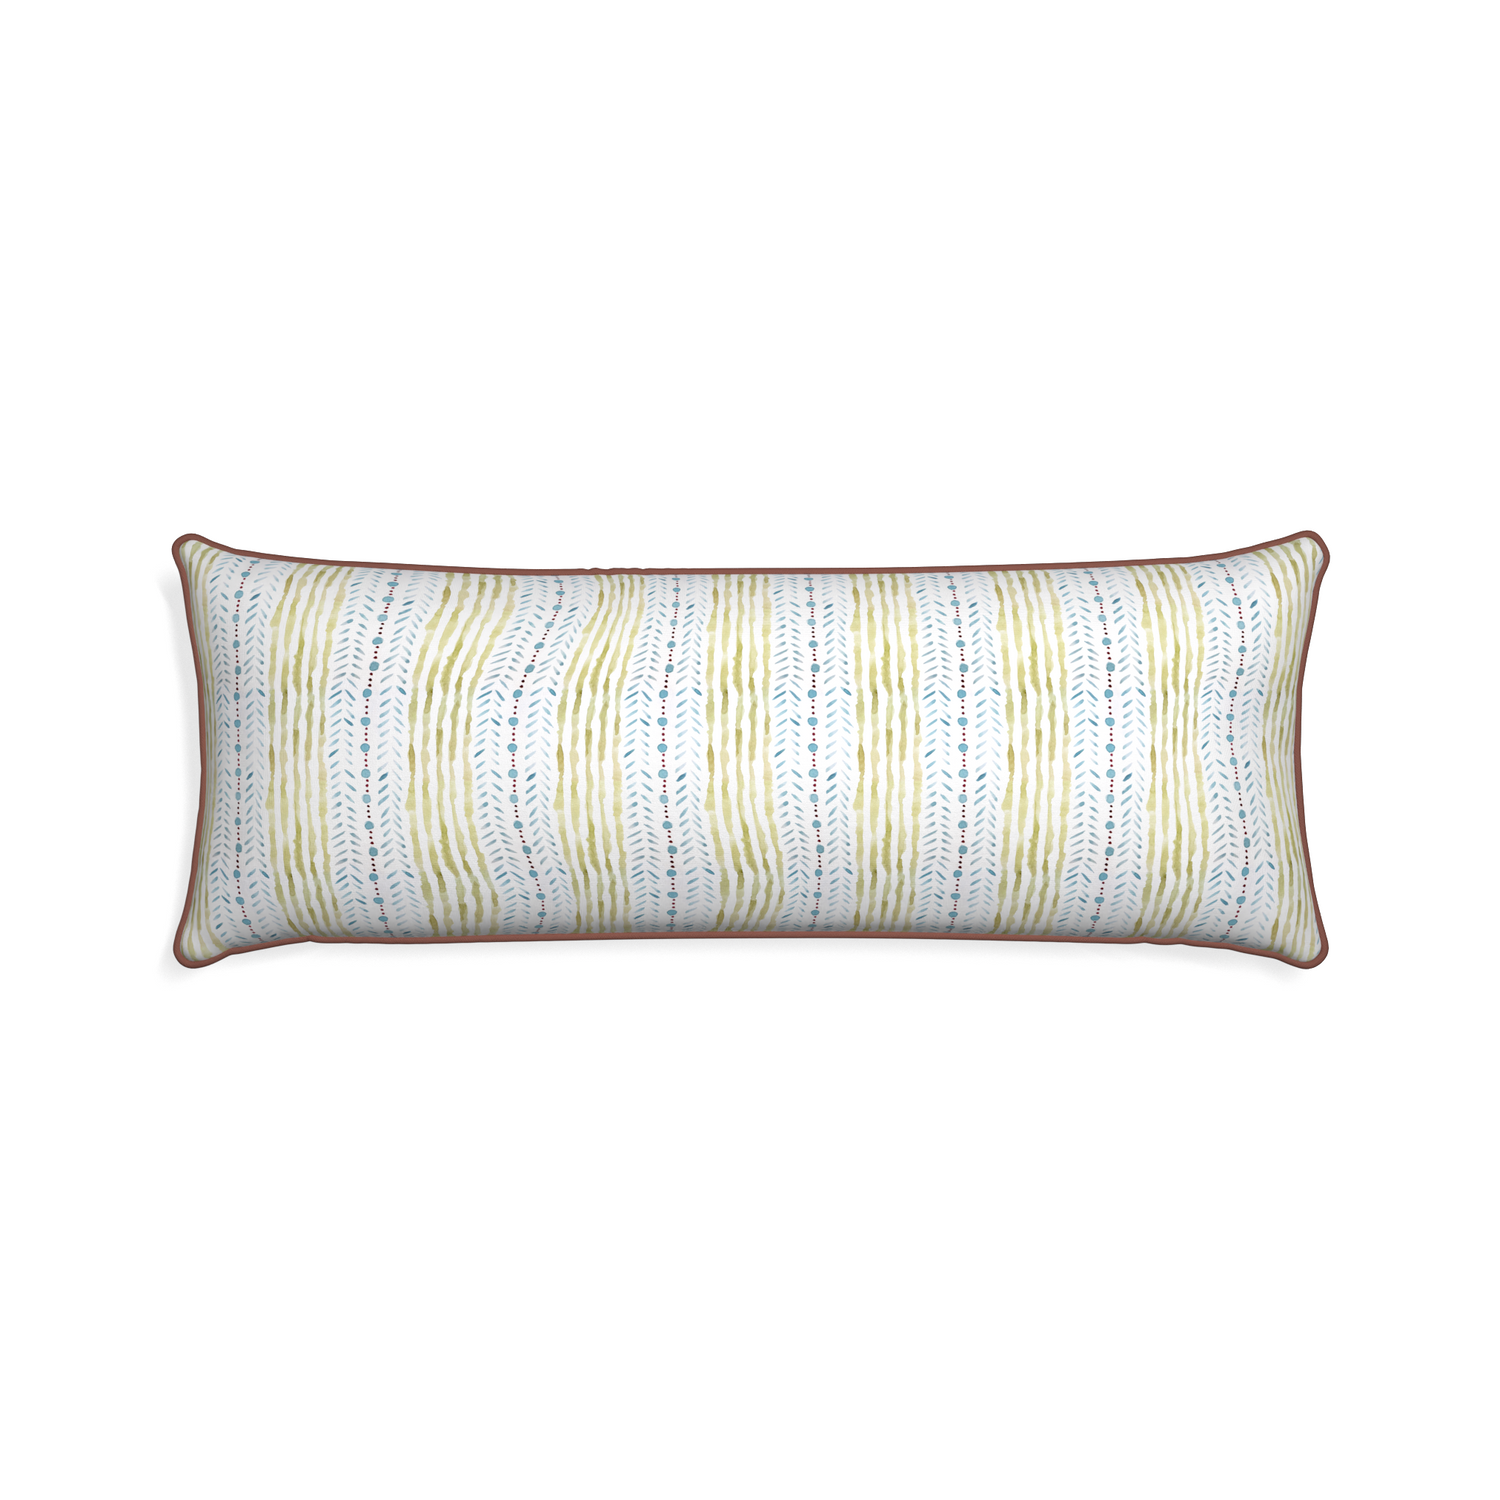 Xl-lumbar julia custom blue & green stripedpillow with w piping on white background